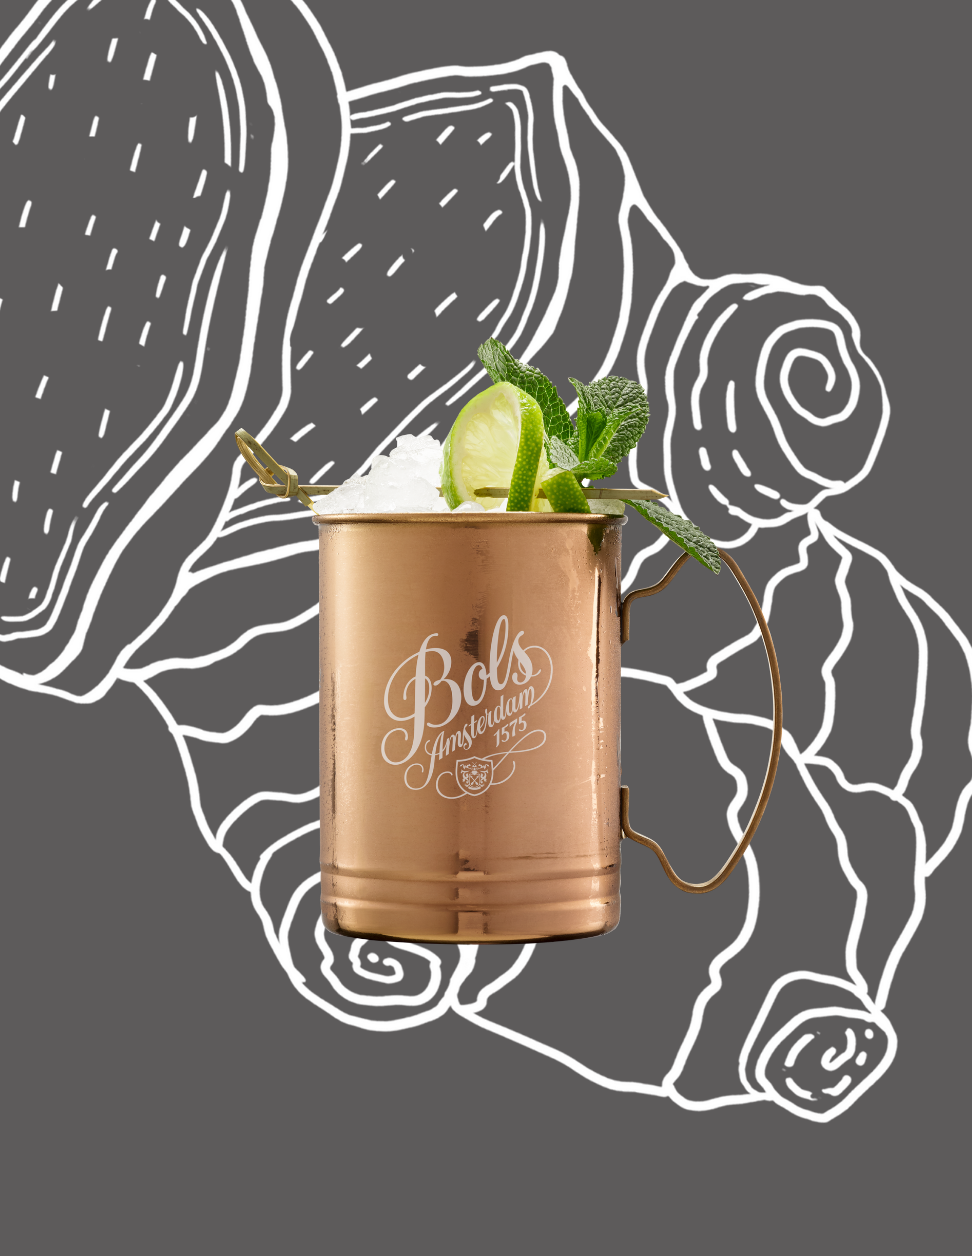 Ginger Mule Cocktail Recipe with Bols Genever Original Products